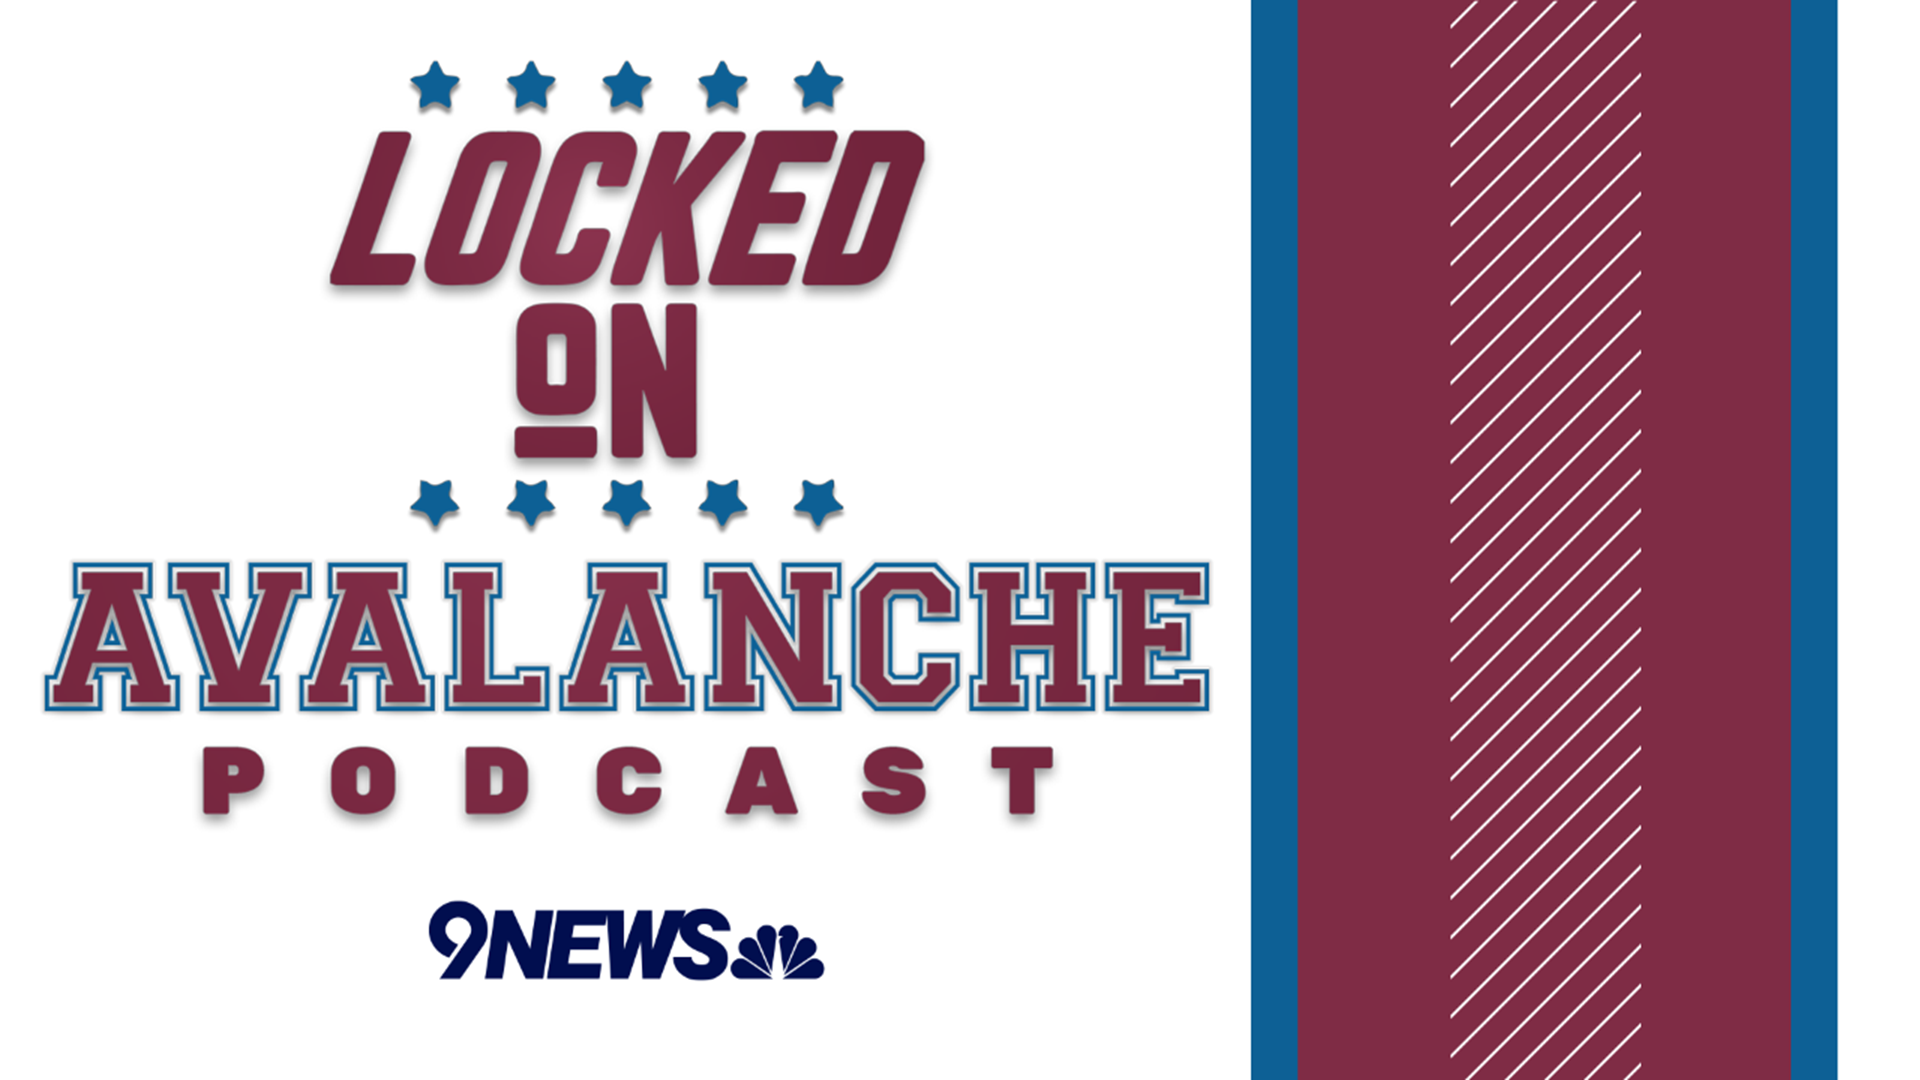 Locked On Avalanche podcast host Chris Micieli looks back at former Avs GM Pierre Lacroix.